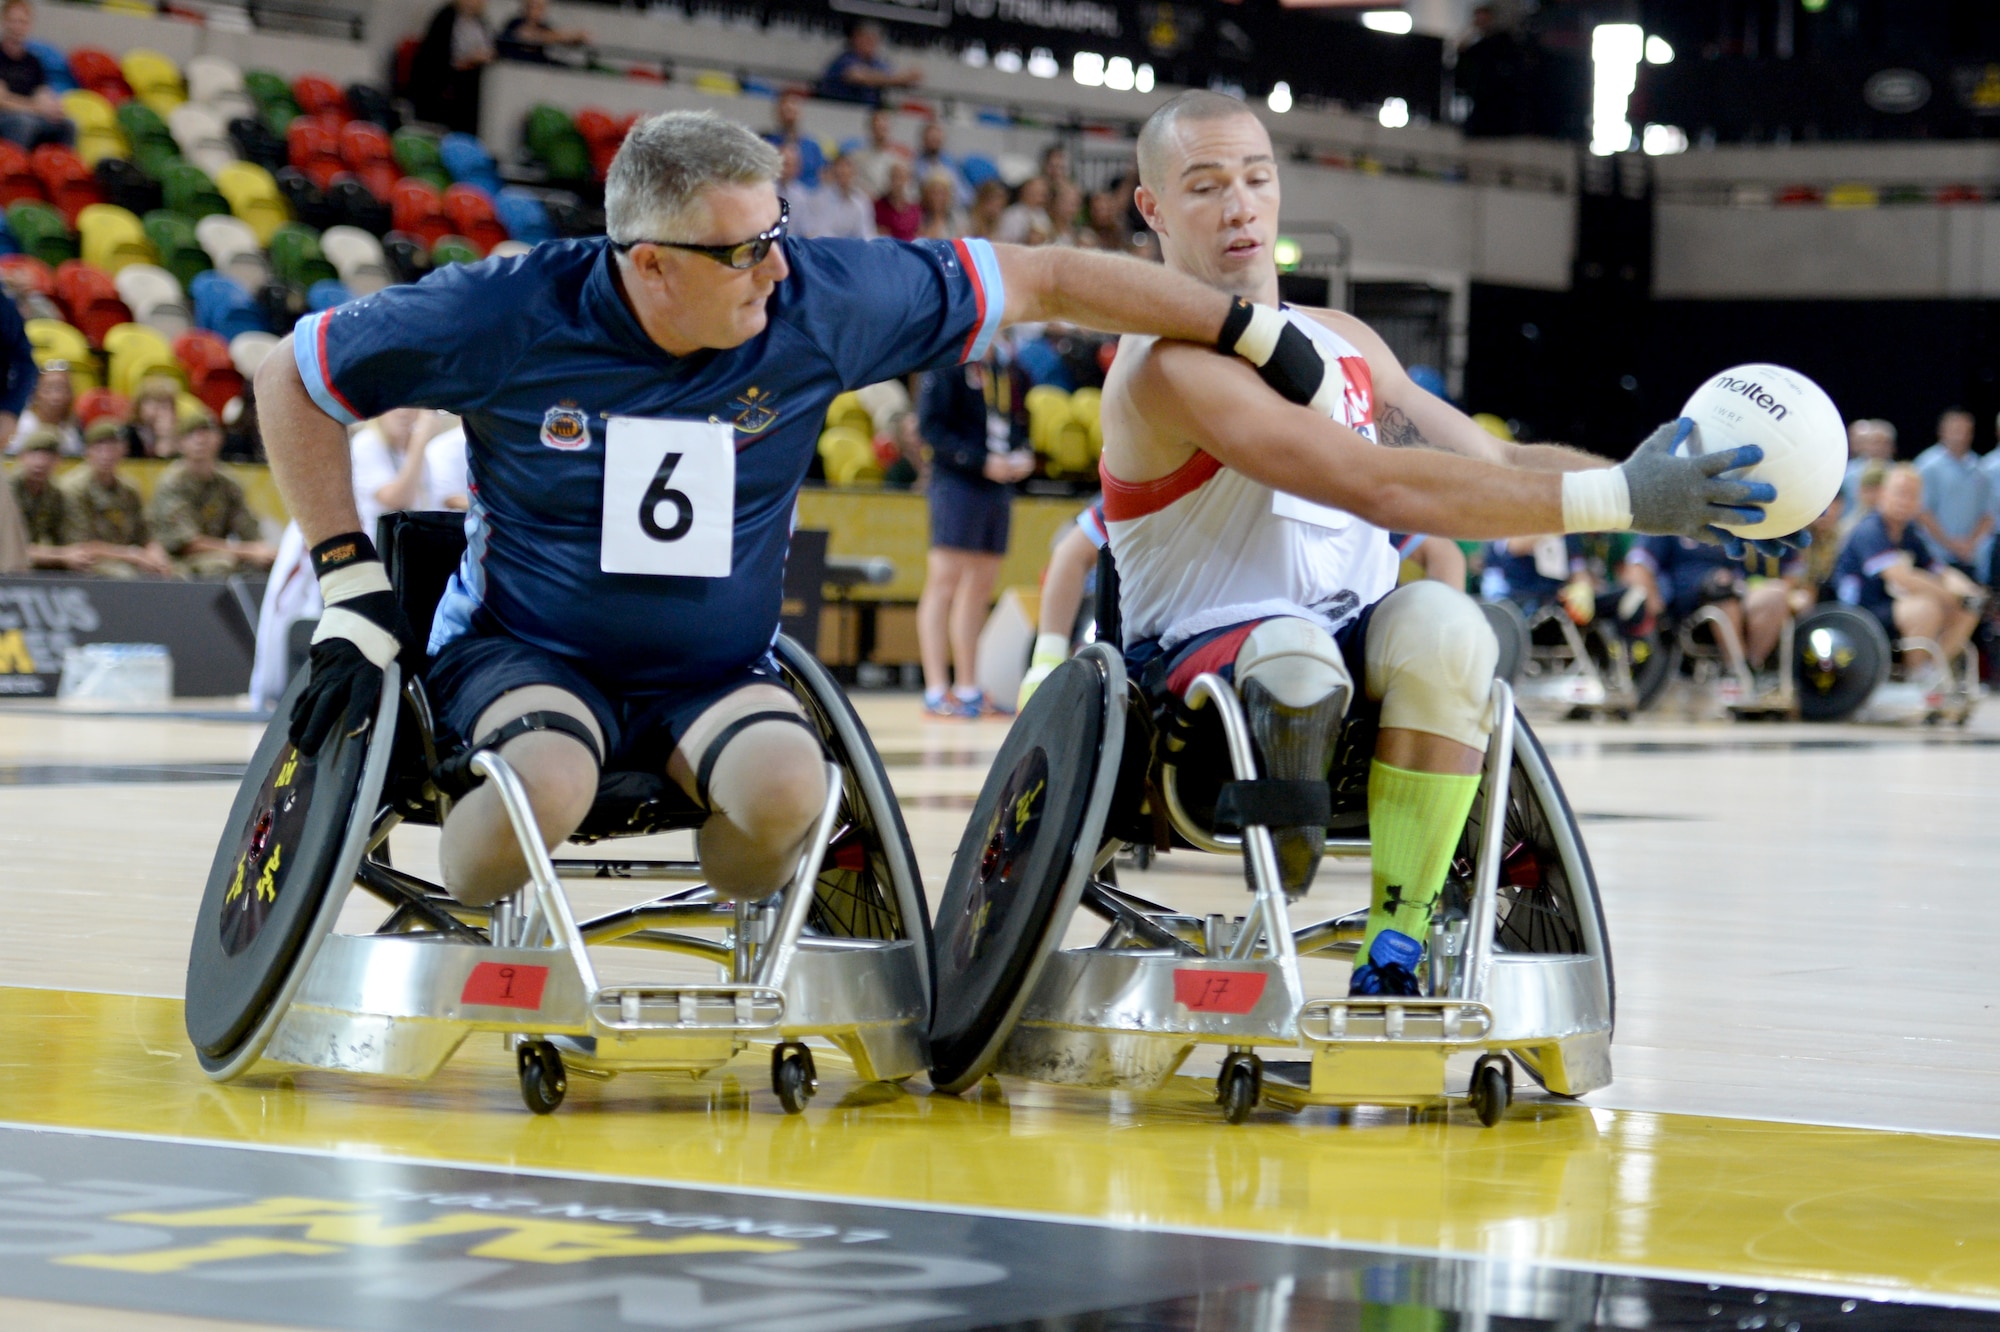 Army Sgt. Ryan McIntosh, representing the U.S., keeps the ball away from a defender during a wheelchair rugby match against Australia Sept. 12, 2014, at the 2014 Invictus Games in London. The U.S. won the match 14-4. Invictus Games is an international competition that brings together wounded, injured and ill service members in the spirit of friendly athletic competition. American Soldiers, Sailors, Airmen and Marines are representing the U.S. in the competition which is taking place Sept. 10-14. (U.S. Navy photo/Mass Communication Specialist 2nd Class Joshua D. Sheppard)